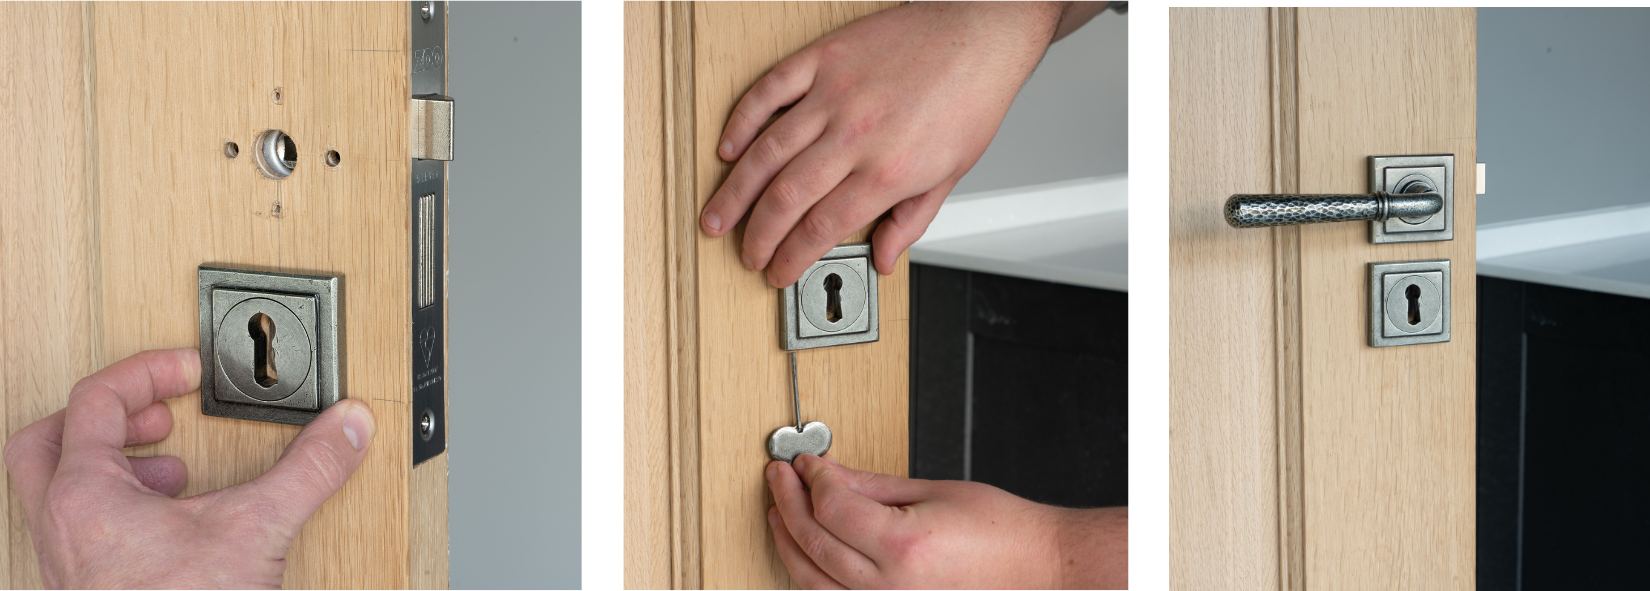 Person fitting a square, Pewter concealed escutcheon to a wooden door frame.